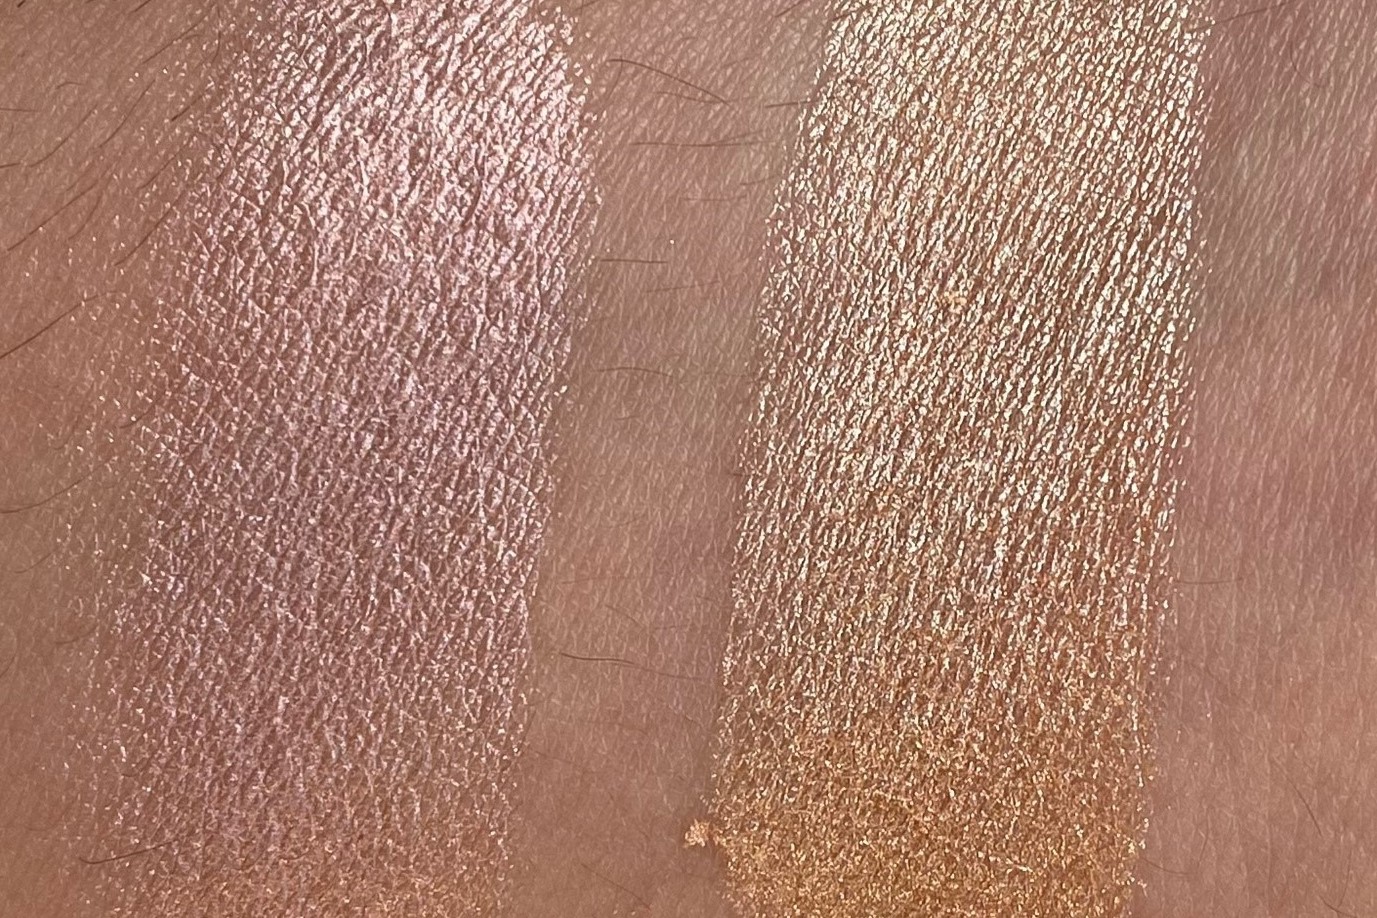 Rare Beauty Highlighter and Rare Beauty Luminizer Swatches | Space NK